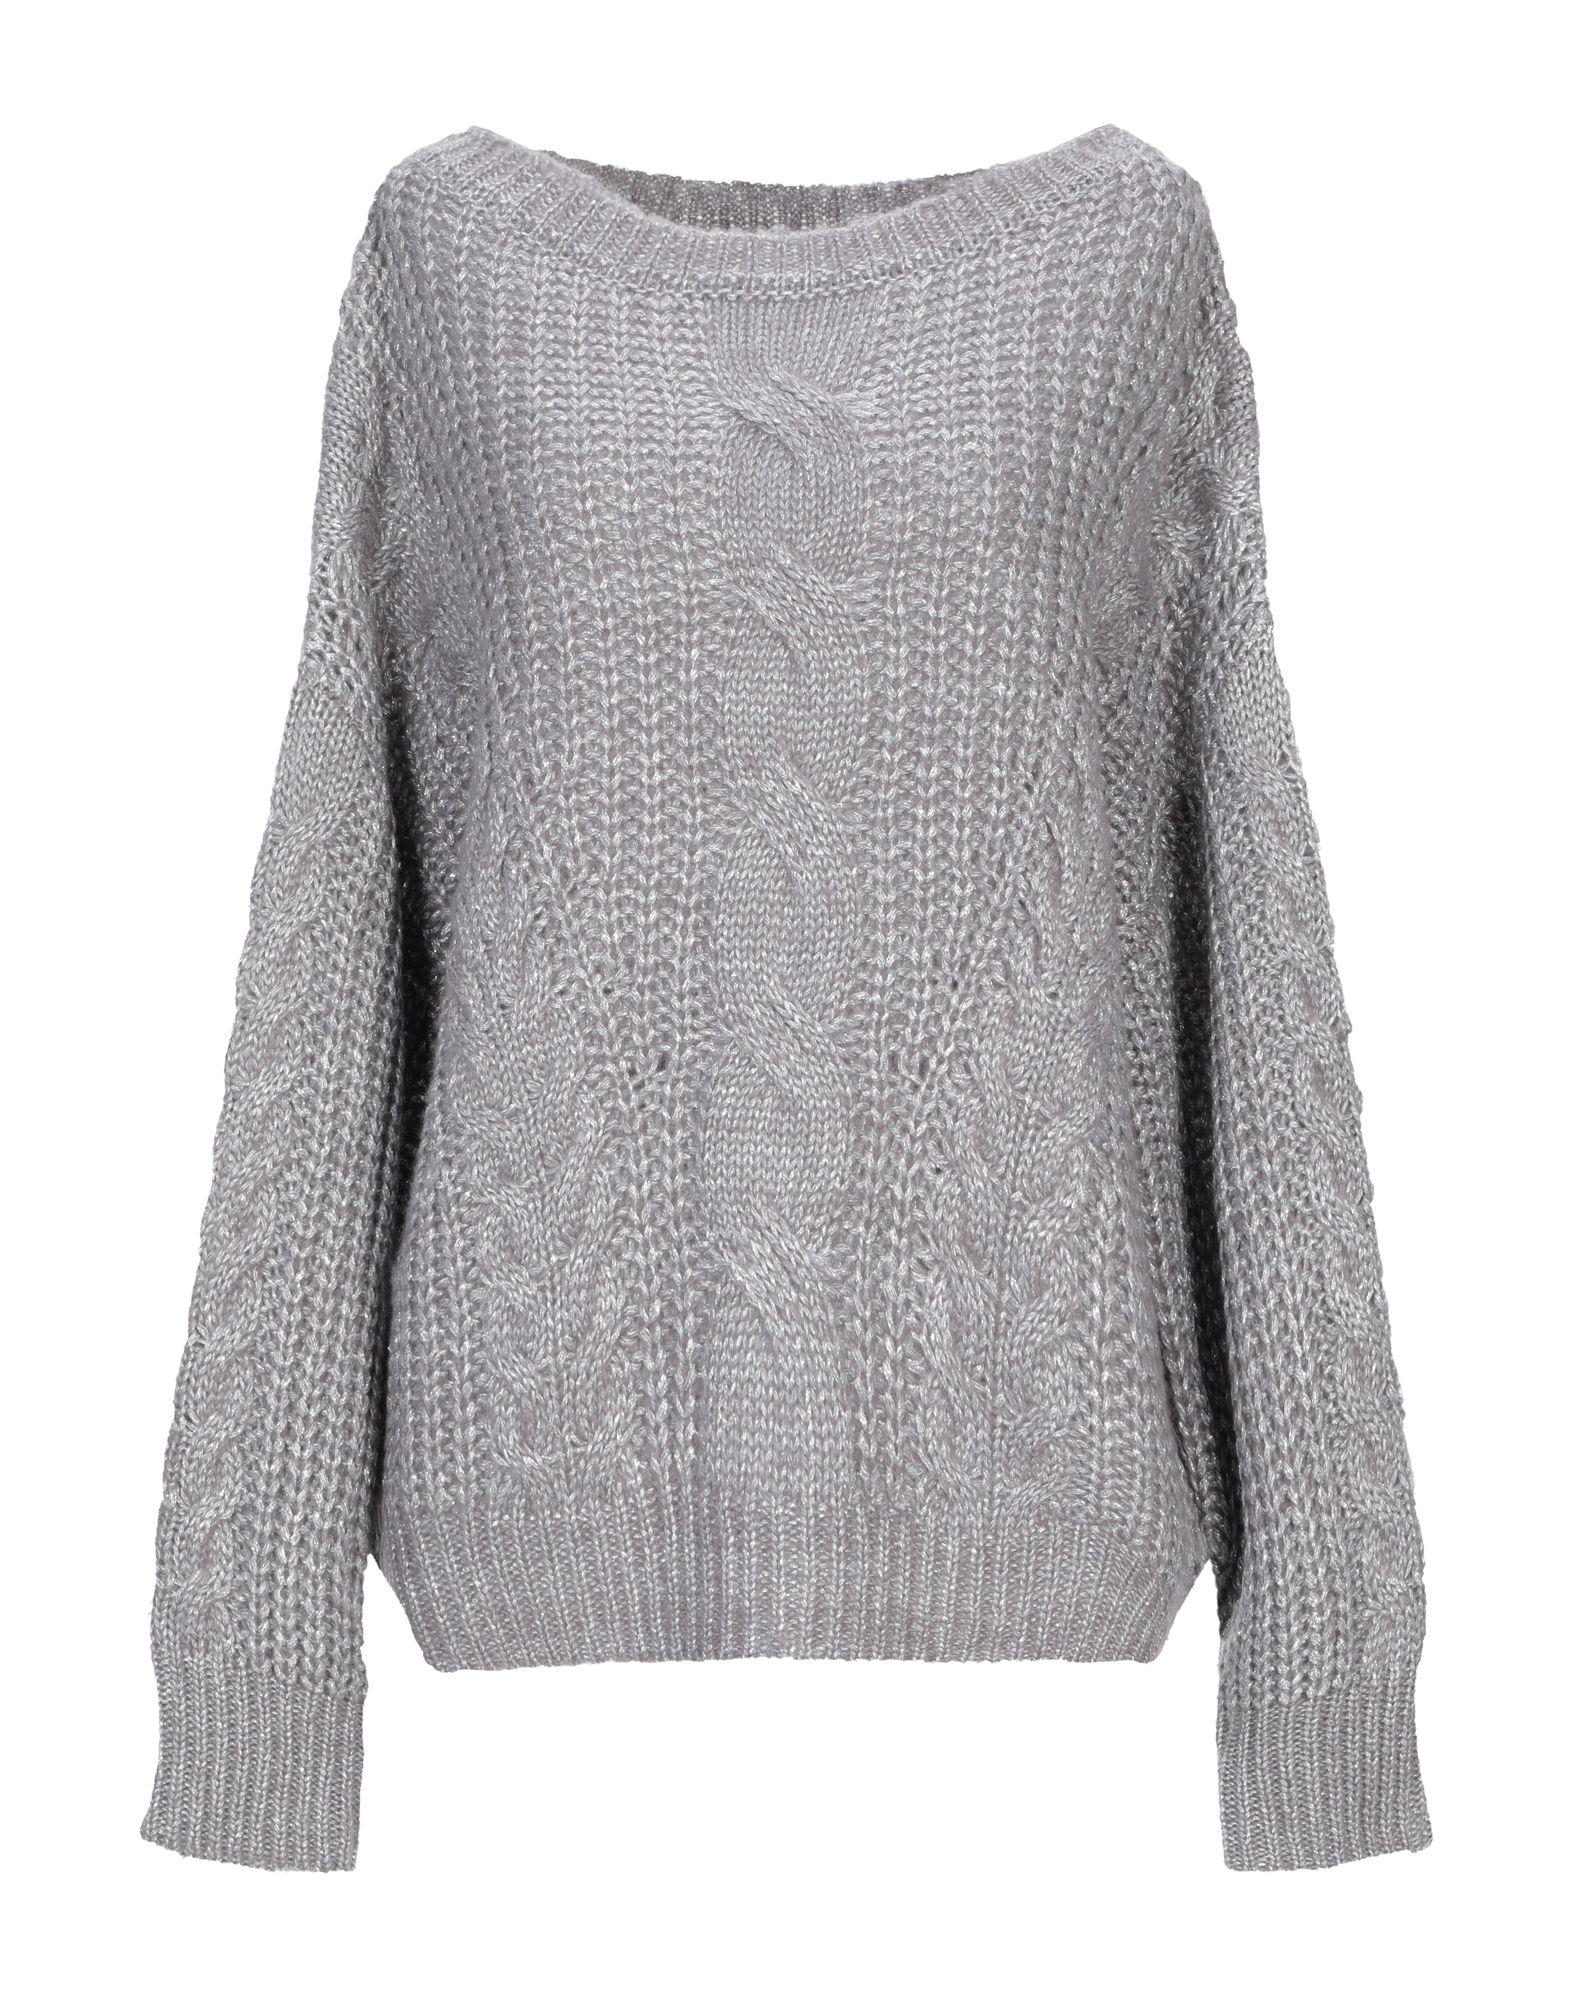 Snobby Sheep Synthetic Jumper in Grey (Gray) - Lyst